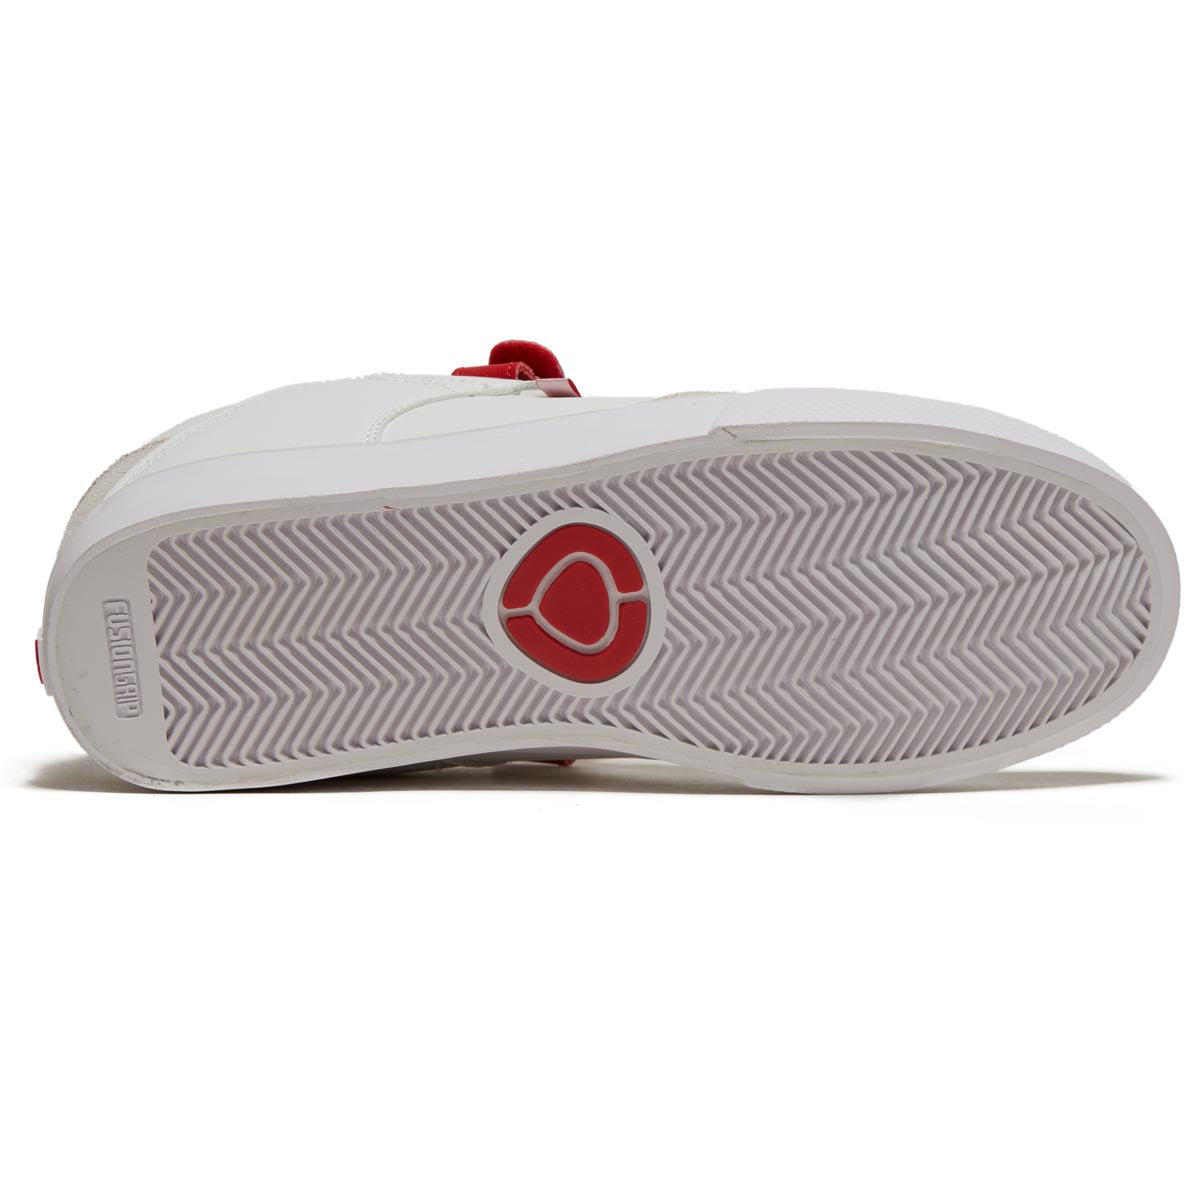 C1rca 205 Vulc Shoes - White/Red image 4